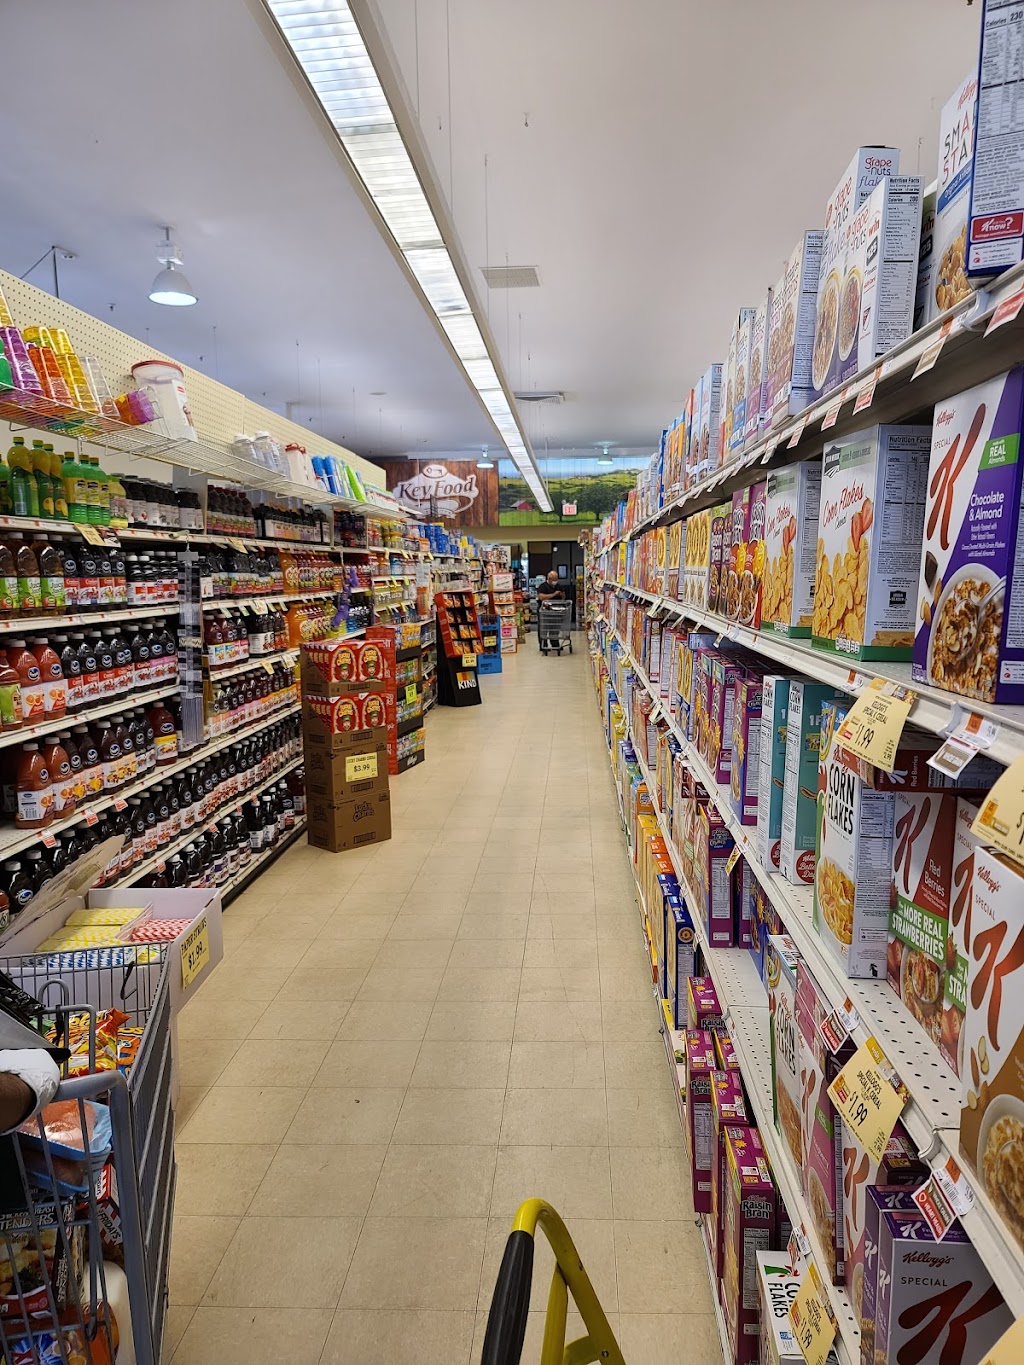 Key Food Supermarkets | 151 Covert Ave, Floral Park, NY 11001 | Phone: (516) 616-1808